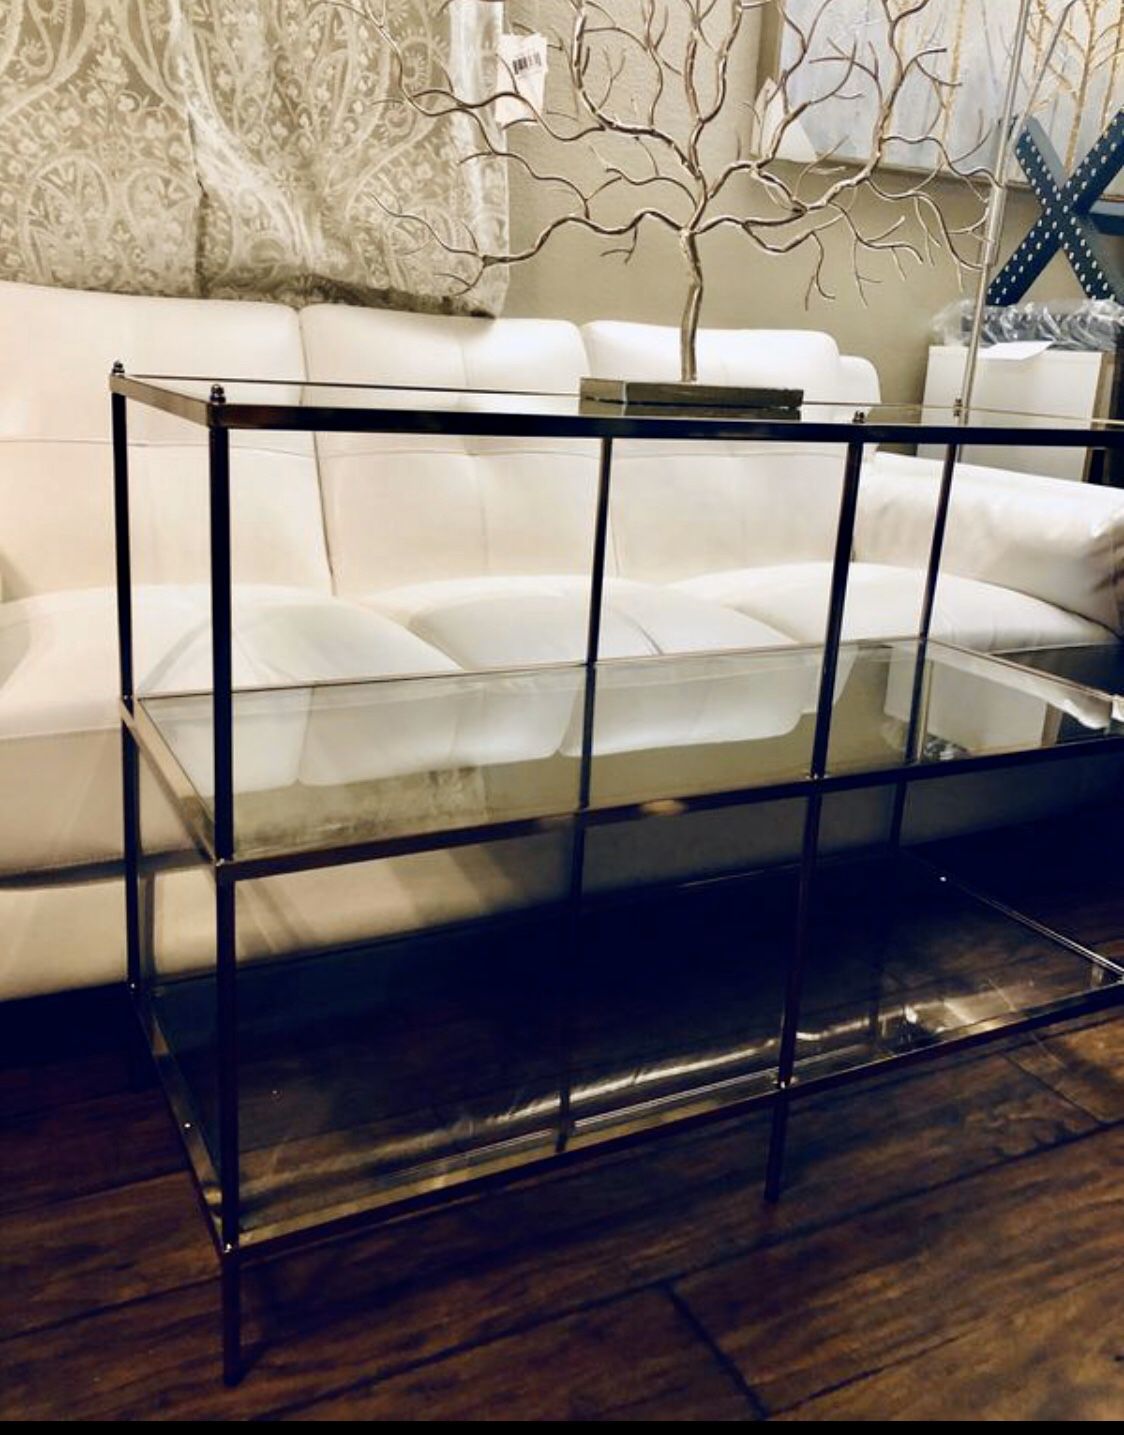 ⭐️New Accent/Console Table w/ mirrored shelf. UP BY ASHLAN AND TEMPERANCE IN CLOVIS